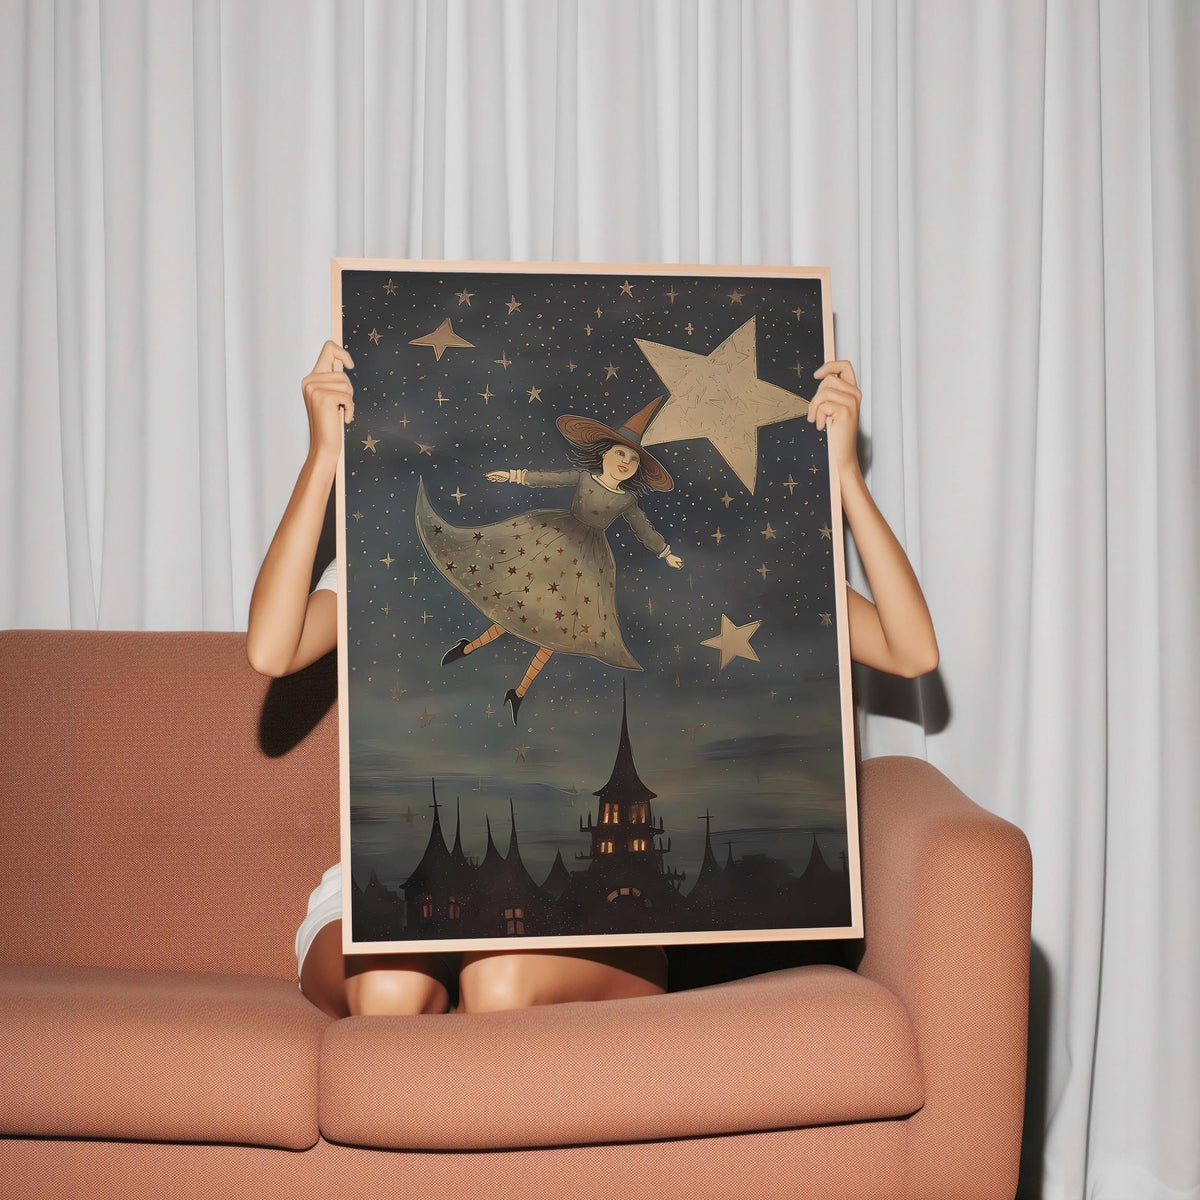 a woman is holding up a picture of a girl with stars